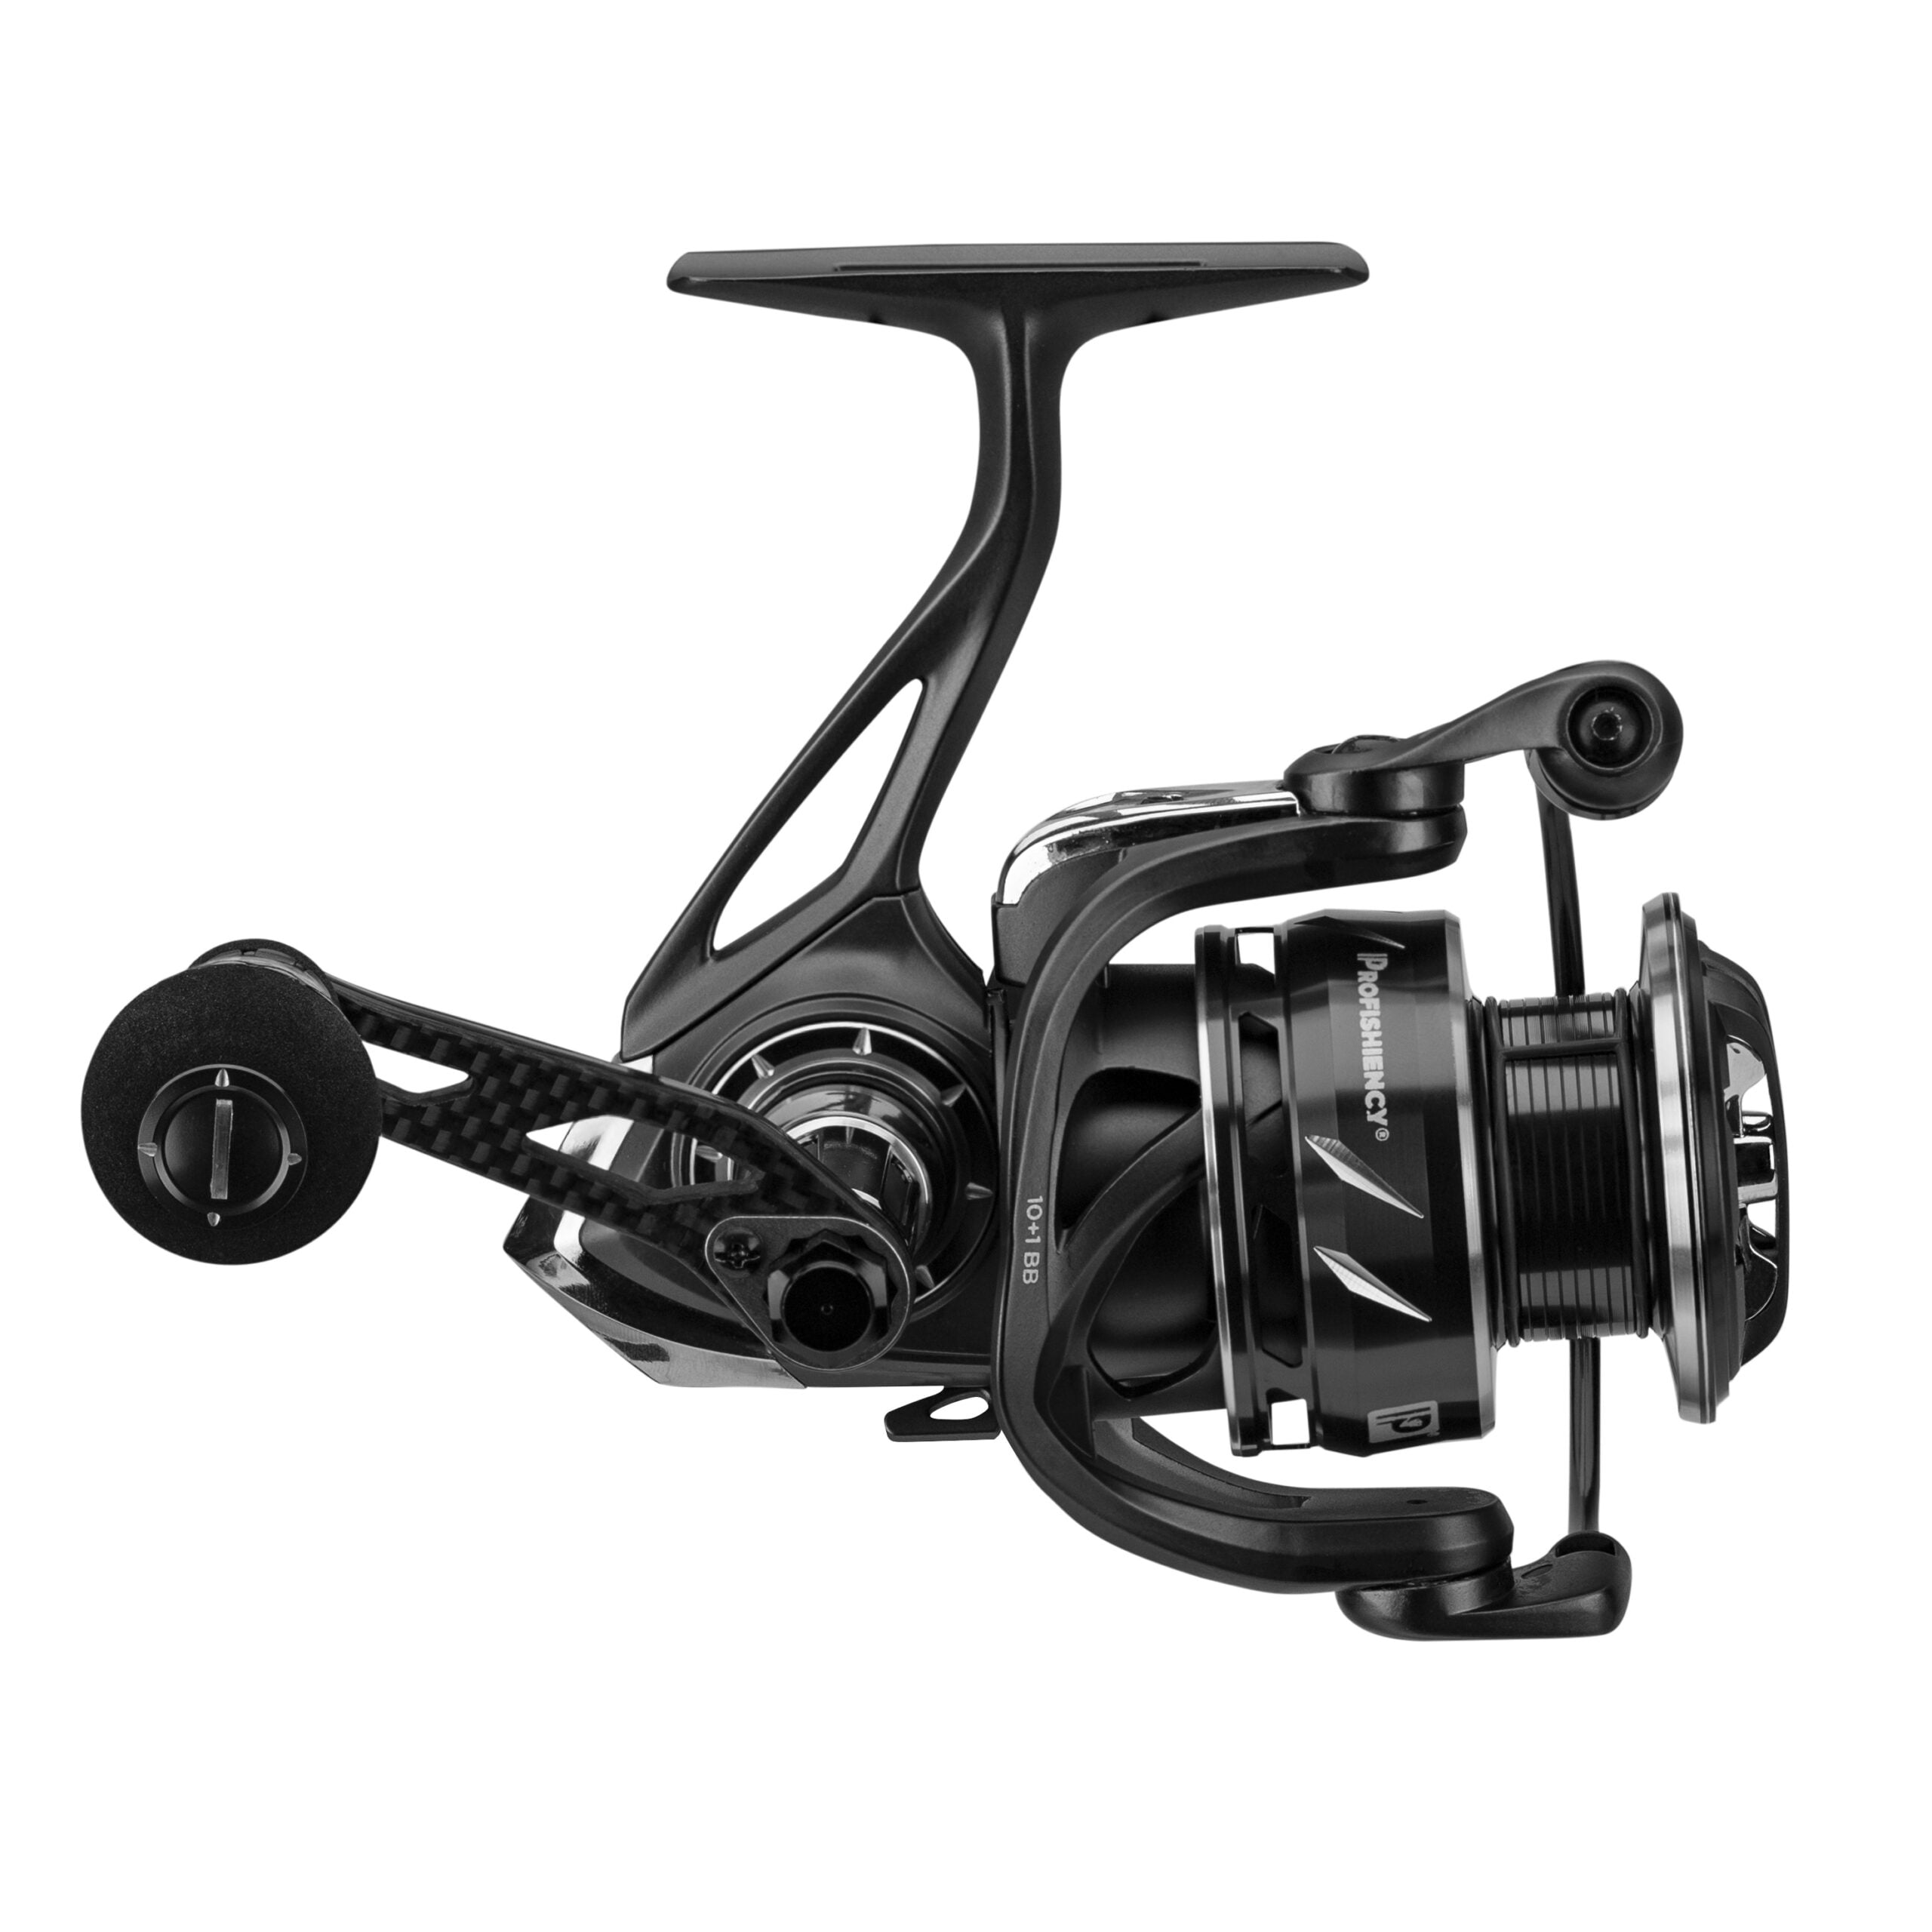 ProFISHiency A12 Charcoal and Silver Spinning Fishing Reel 2000